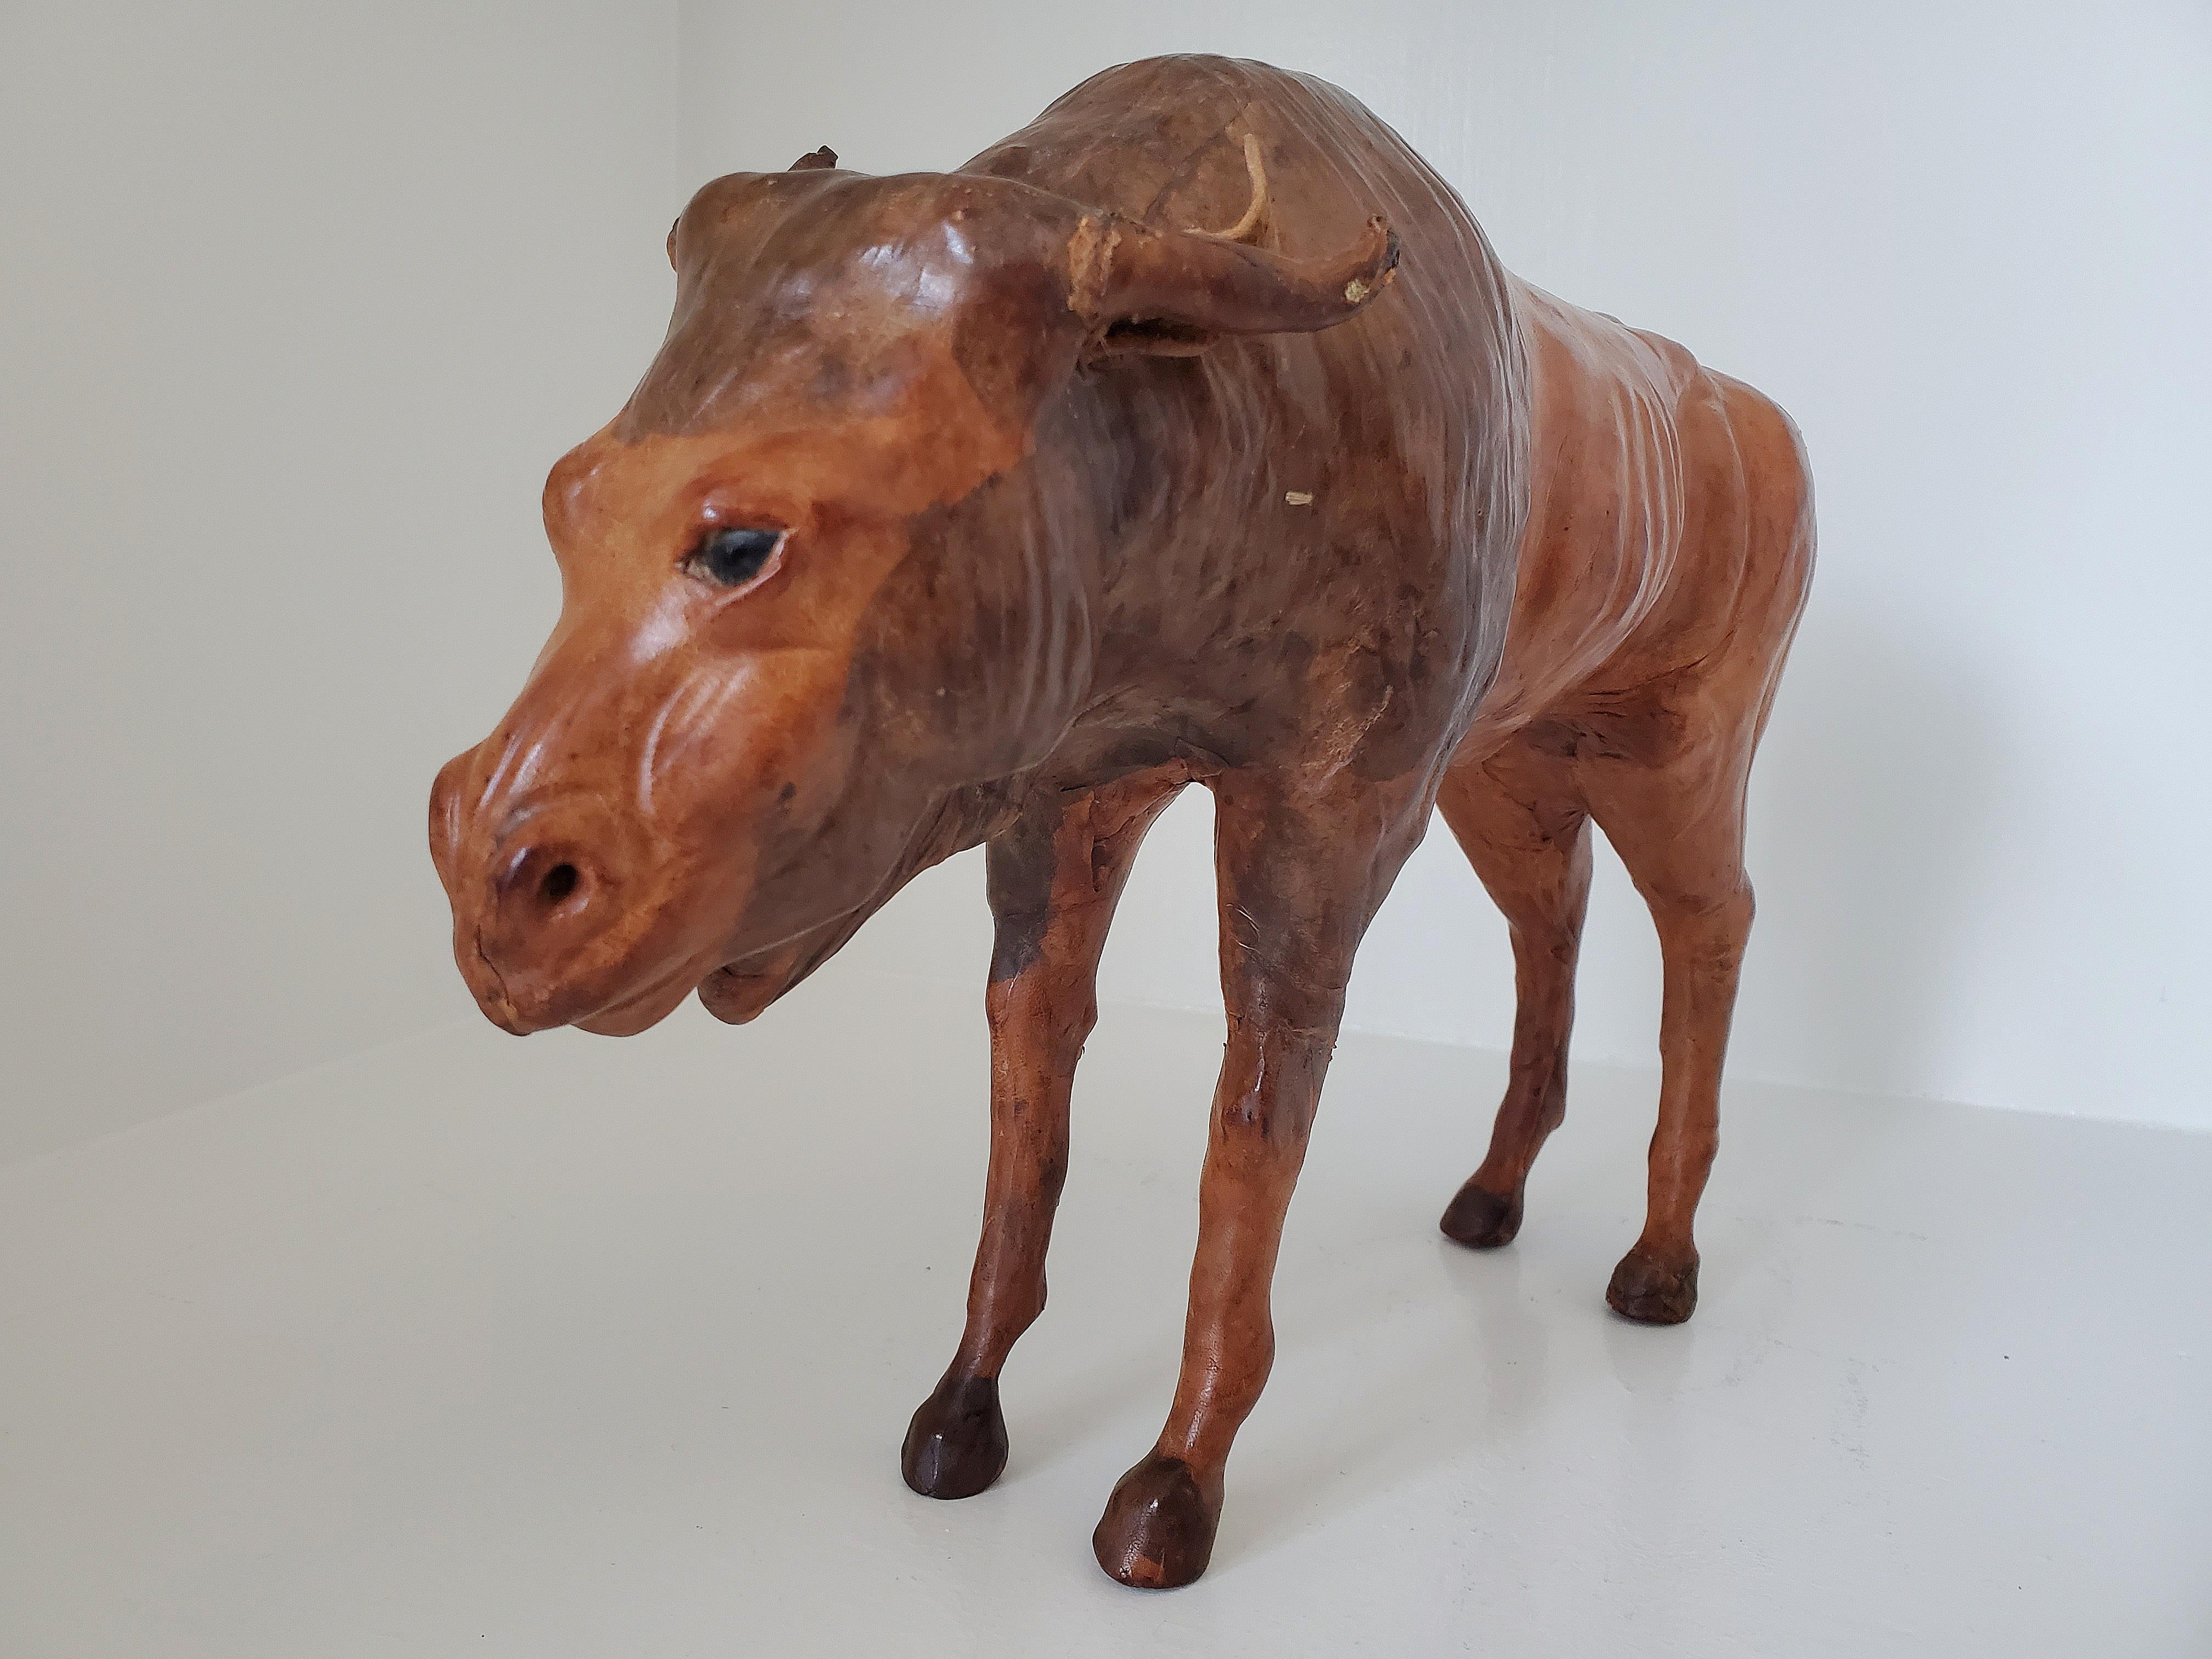 Unknown Vintage Sculpture - Wood and Leather Wildebeest Likely from Liberty's London For Sale